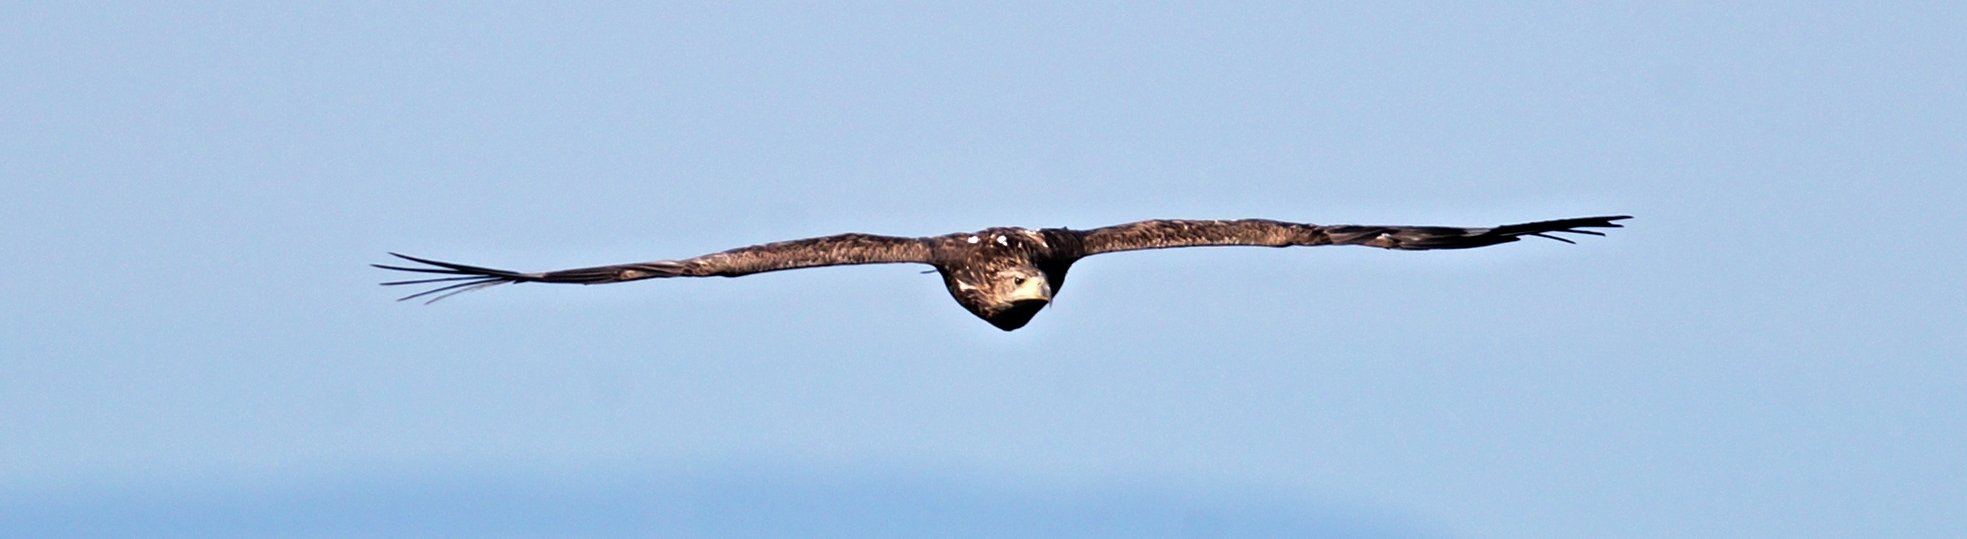 image of the flying bird - Imperial Eagle  